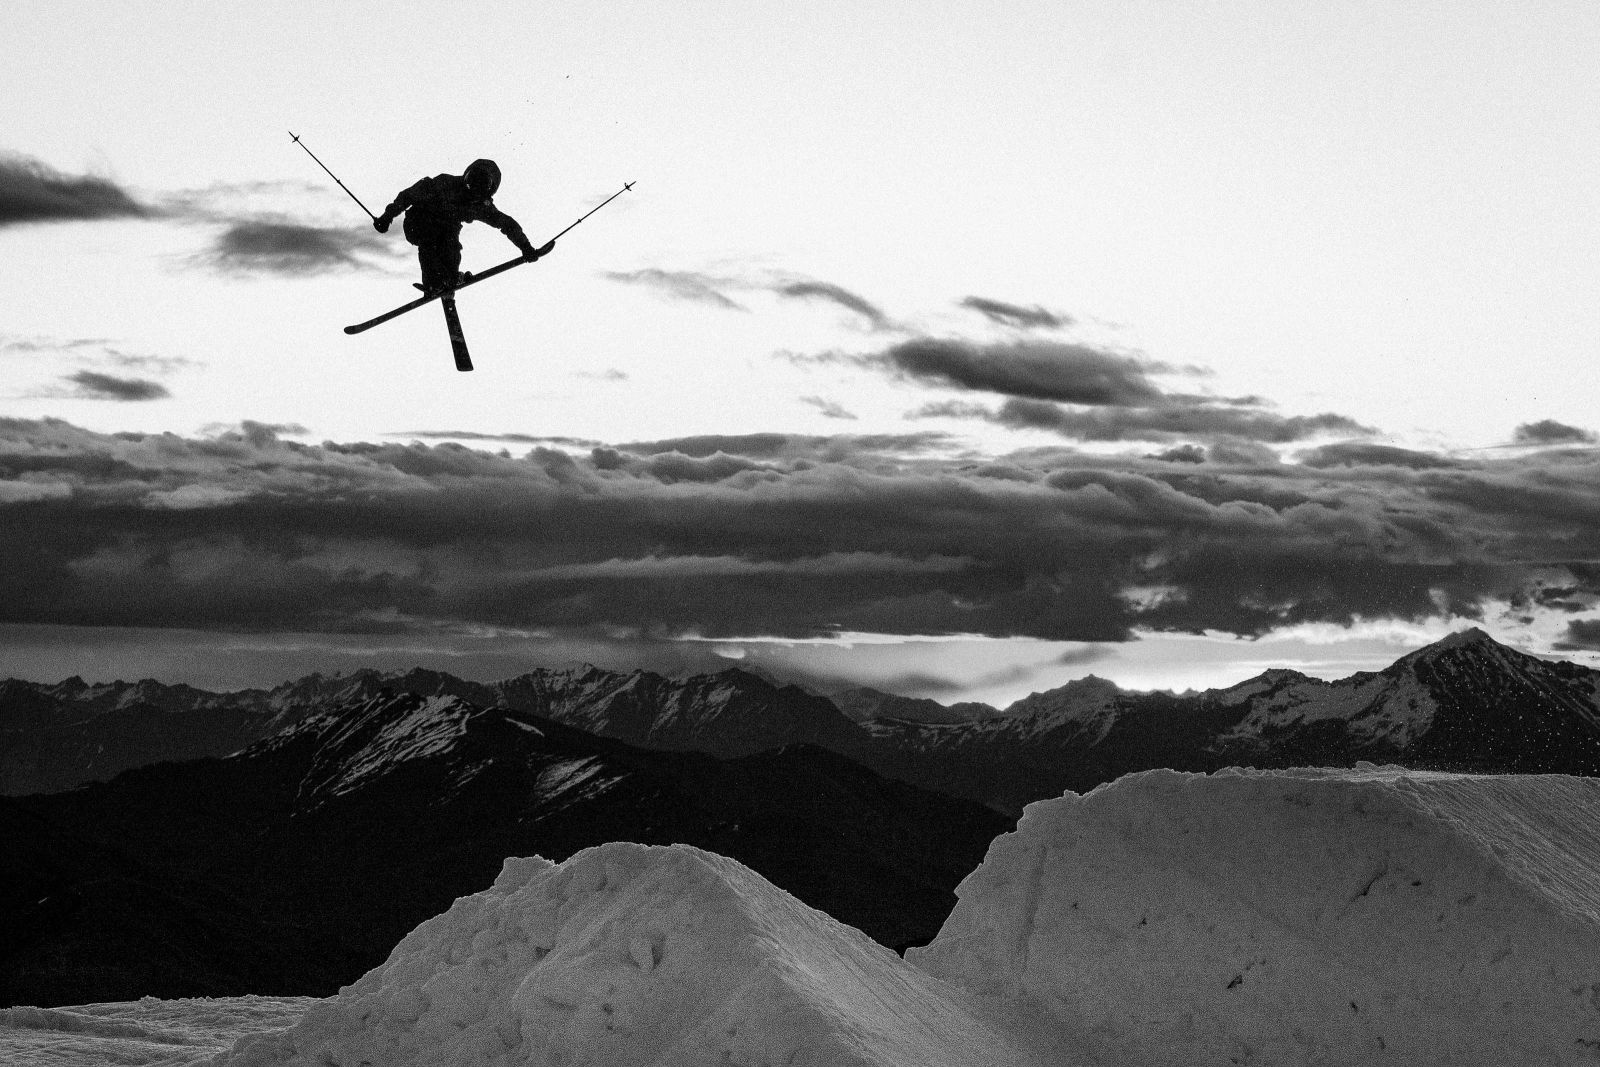 Black and white image of a skier jumping. 